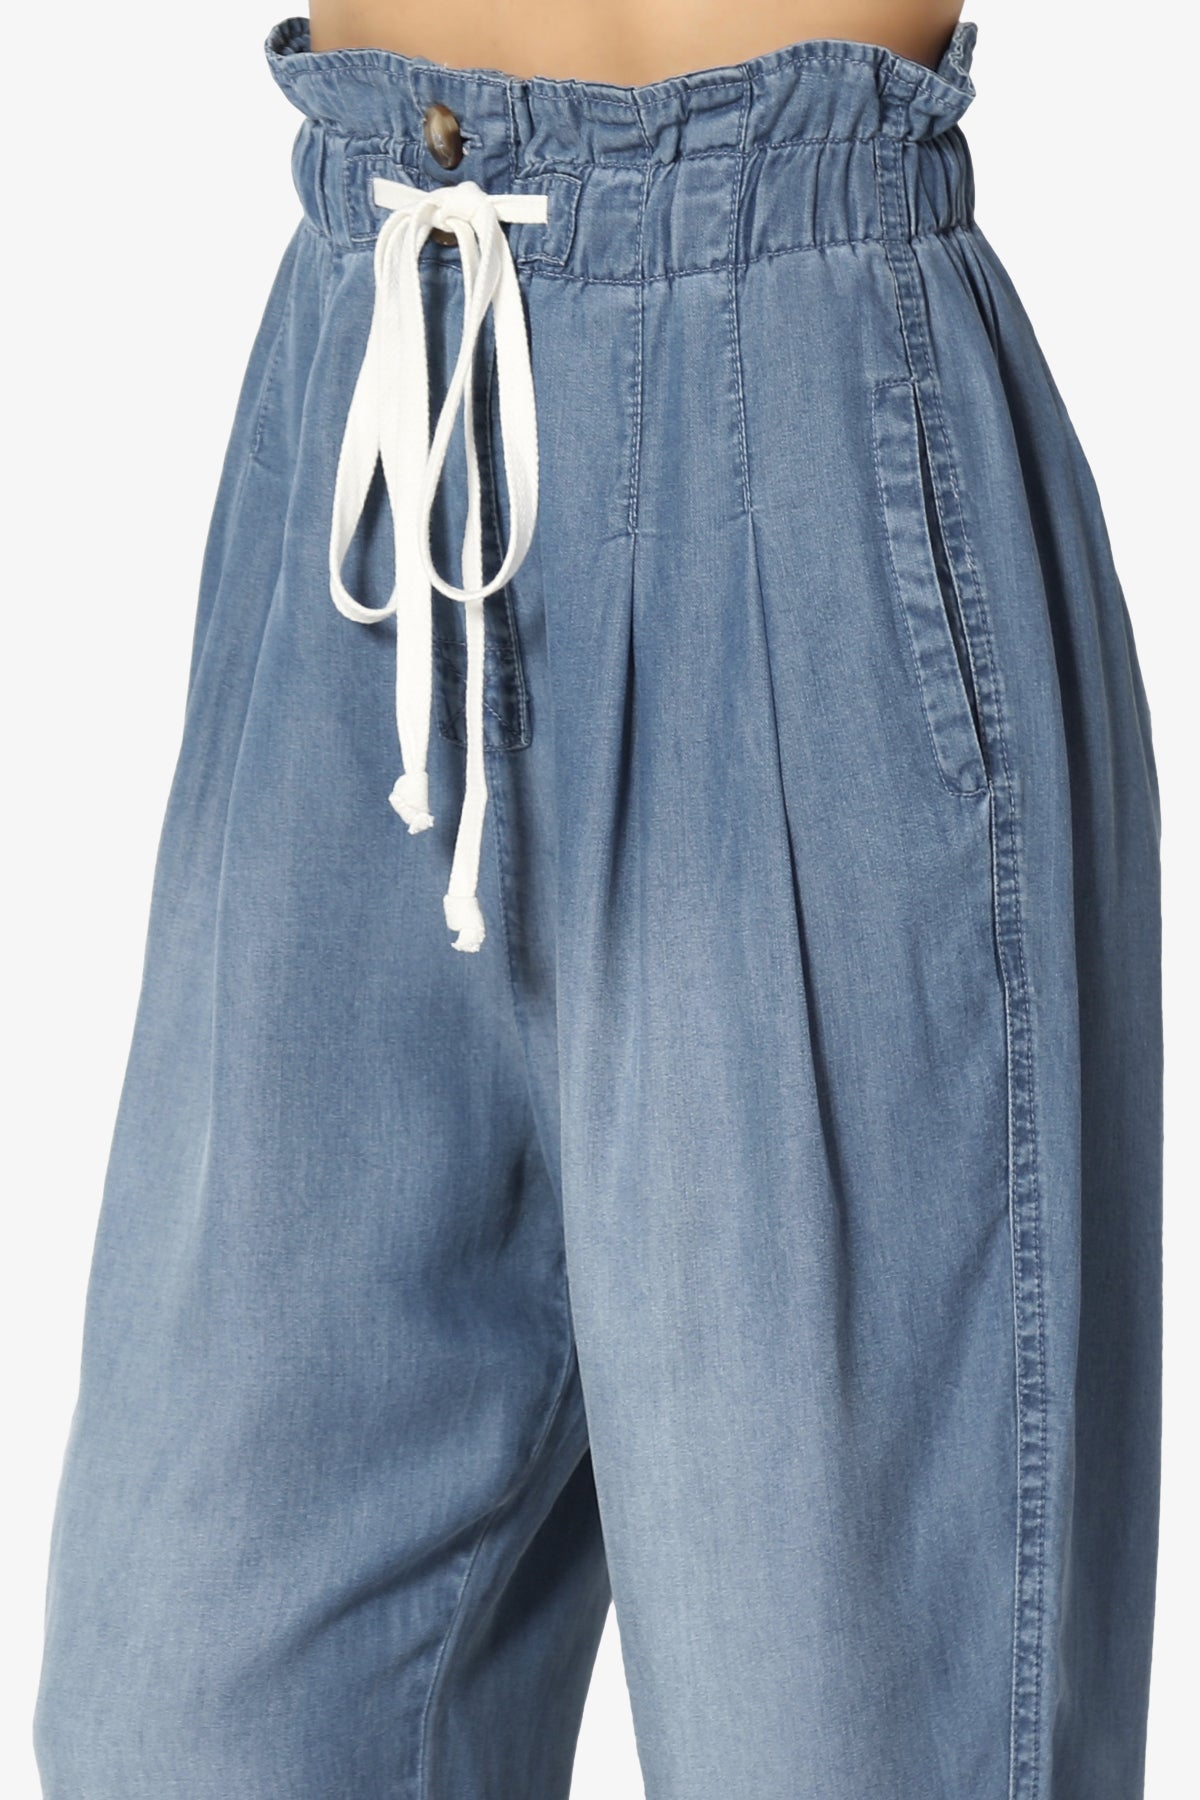 Load image into Gallery viewer, Lilah High Waist Chambray Taper Leg Pants PLUS
